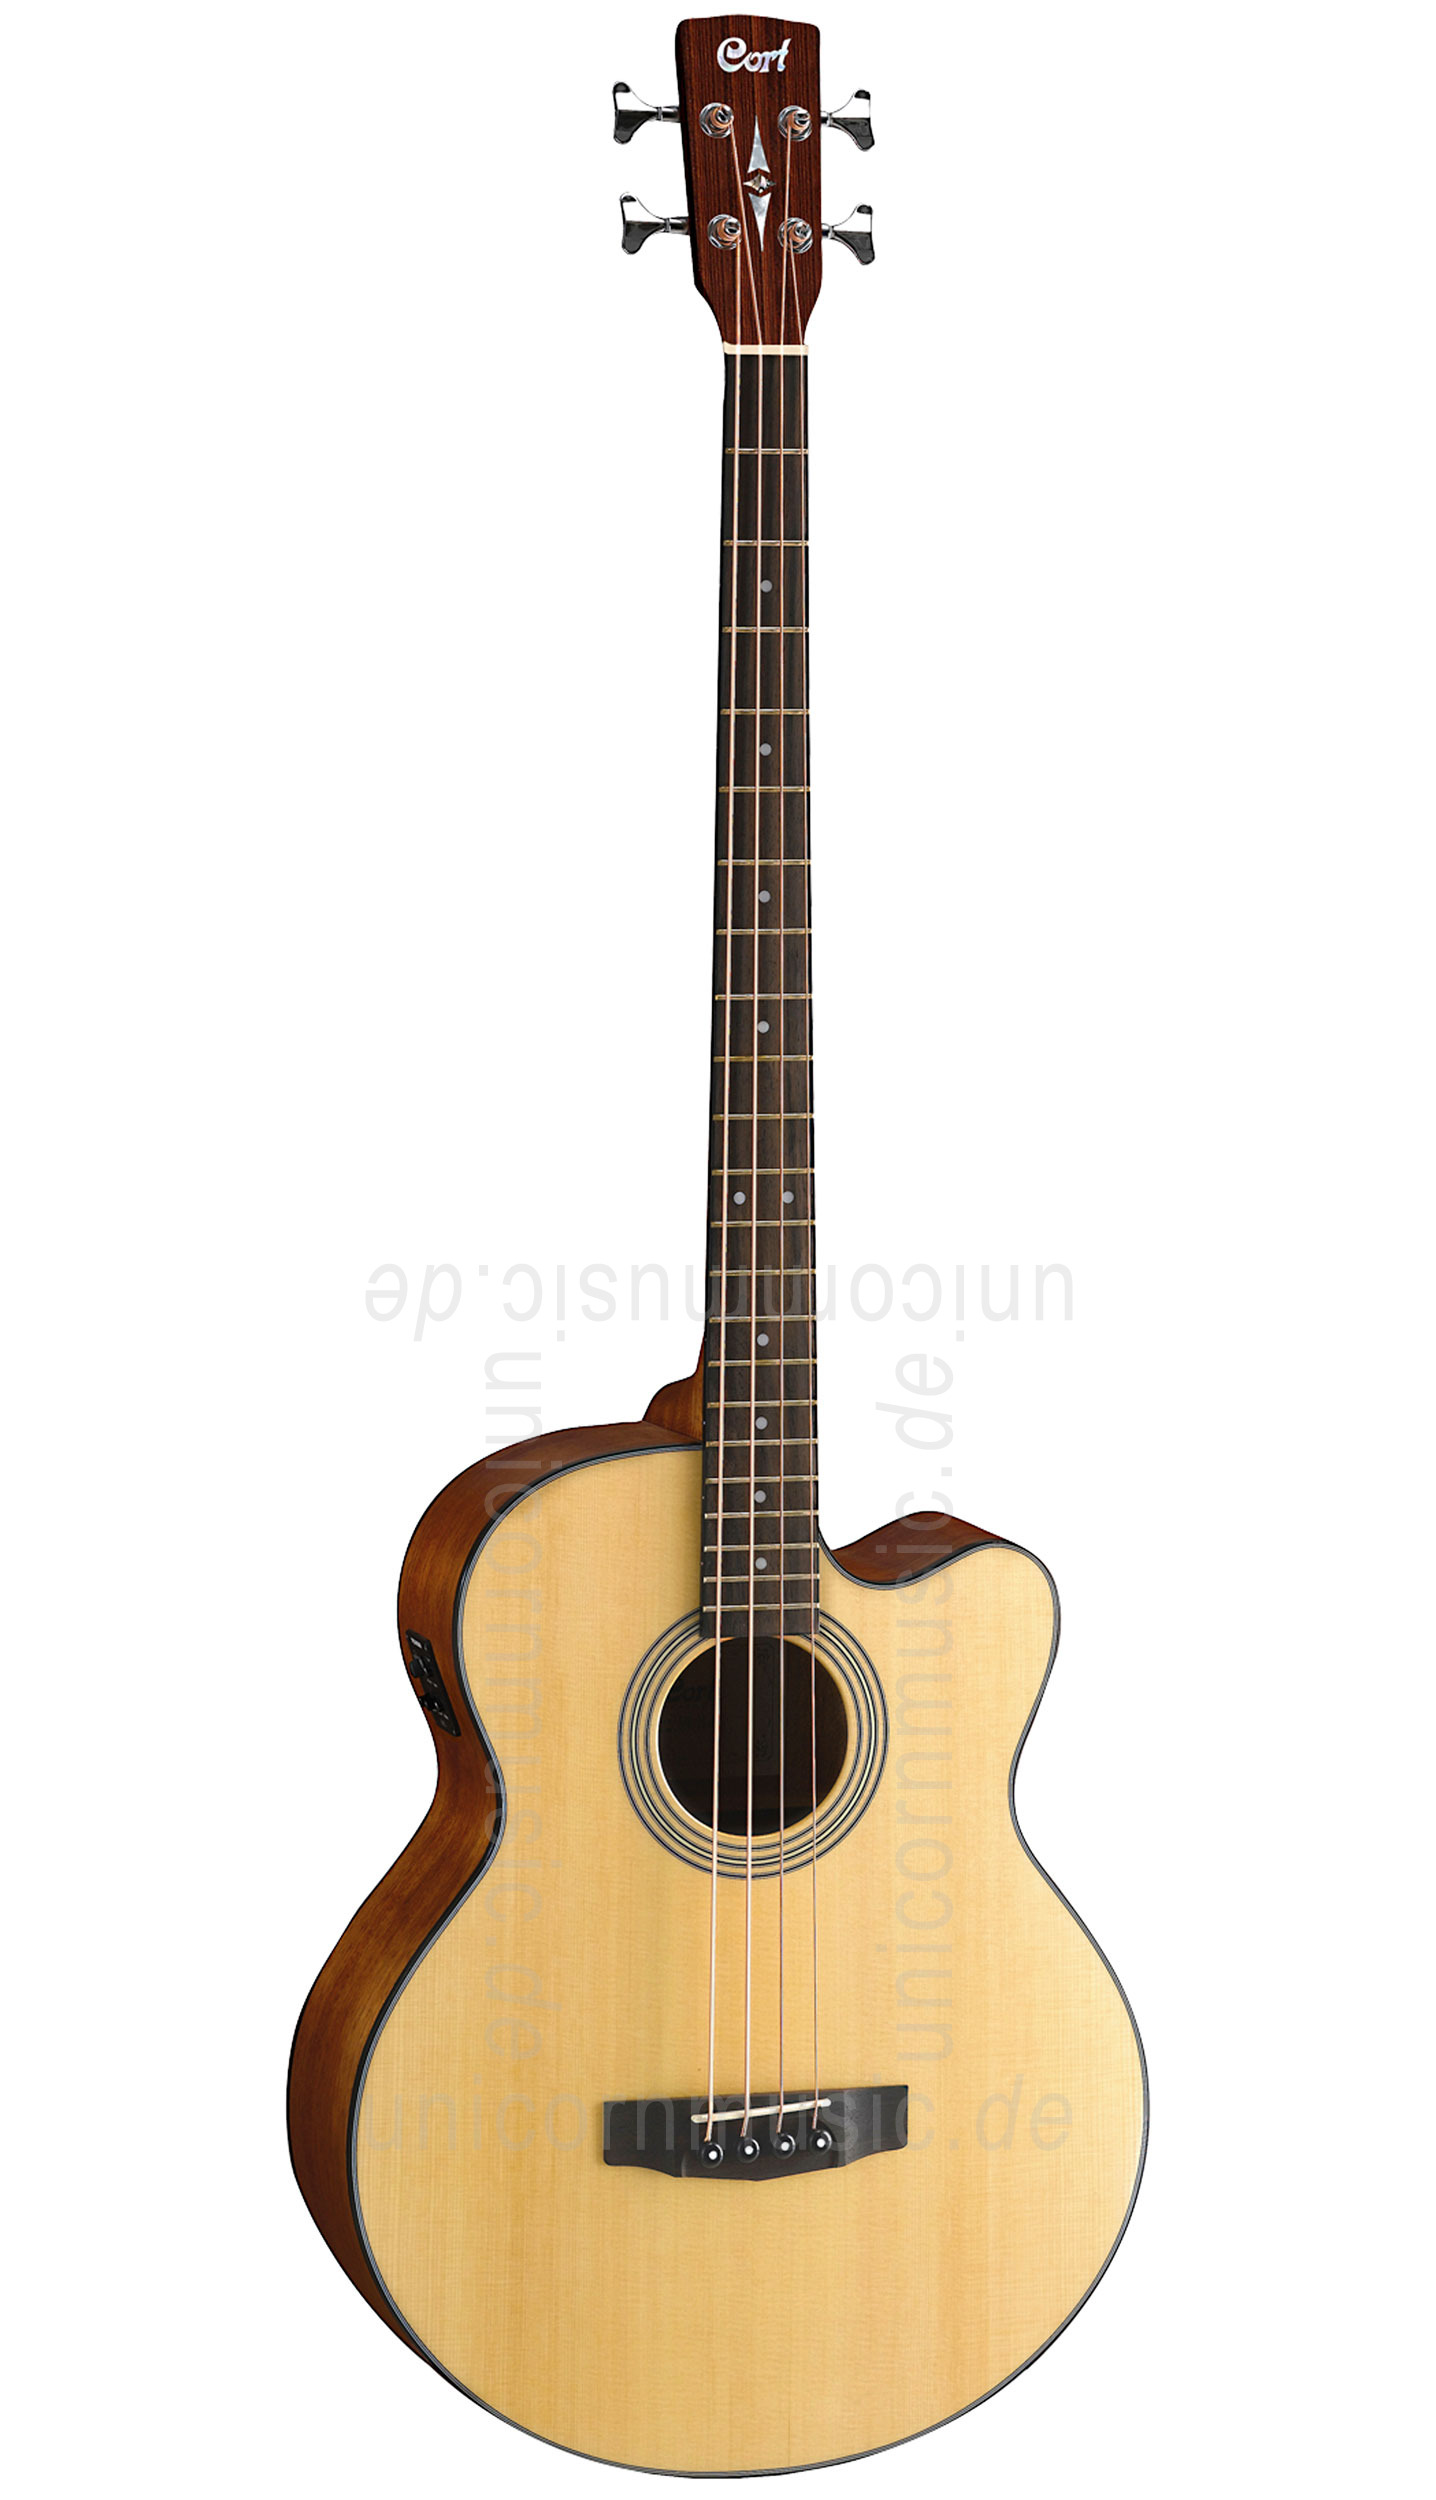 to article description / price Acoustic Bass CORT SJB5 - Fishman Isys Plus - solid top